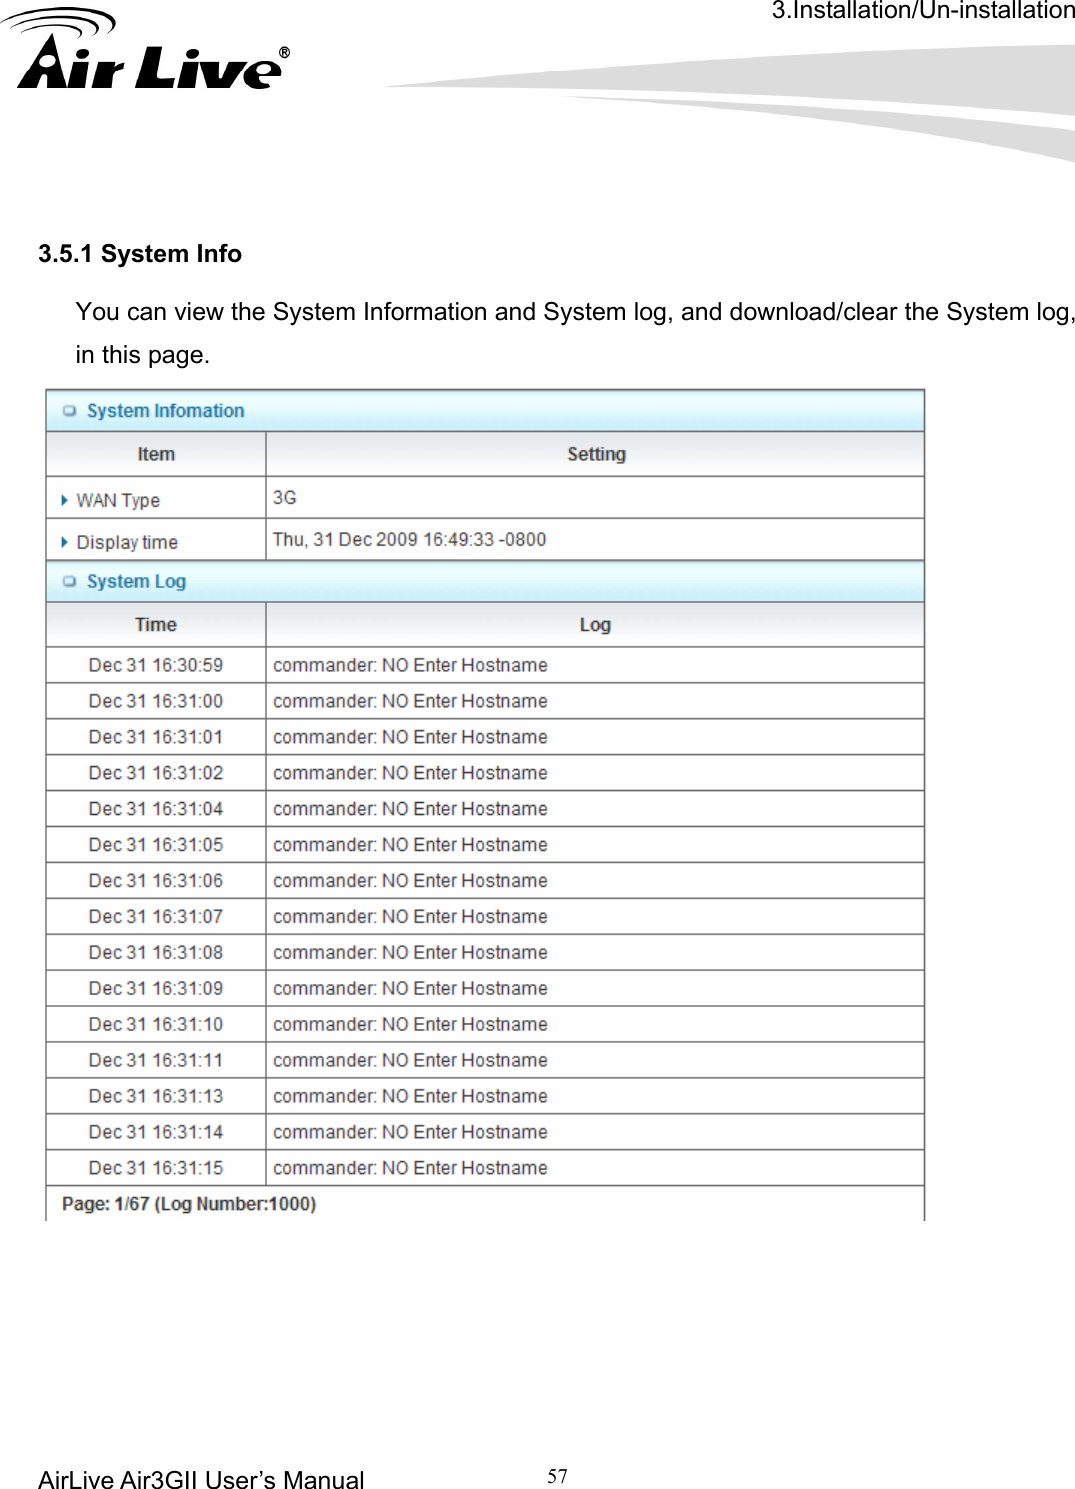 3.Installation/Un-installation AirLive Air3GII User’s Manual 57    3.5.1 System Info You can view the System Information and System log, and download/clear the System log, in this page.                